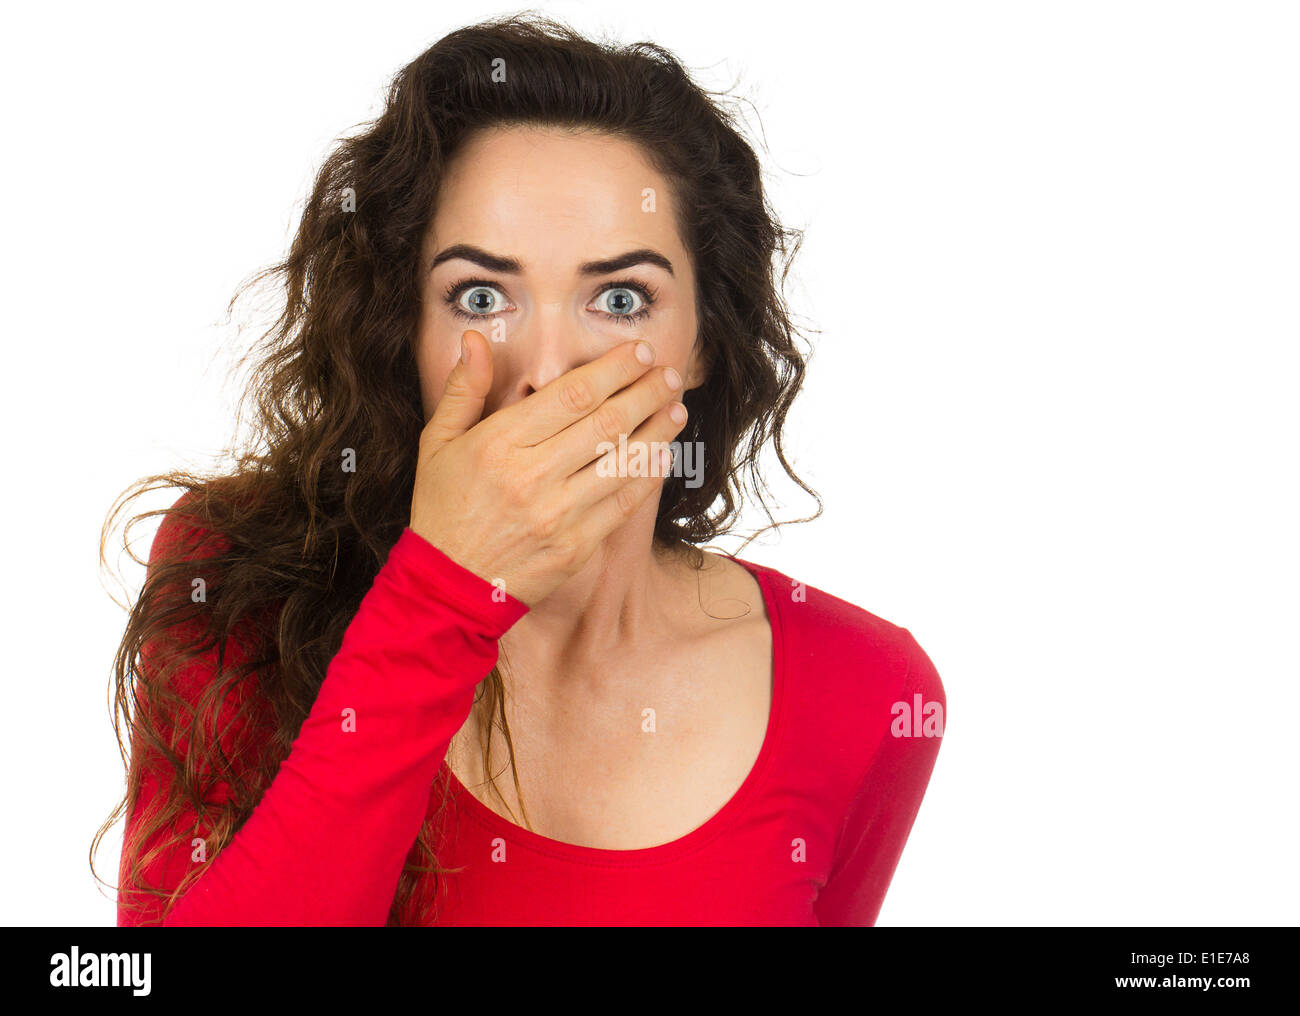 A shocked and frightened woman covering her mouth in surprise and disbelief. Isolated on white. Stock Photo